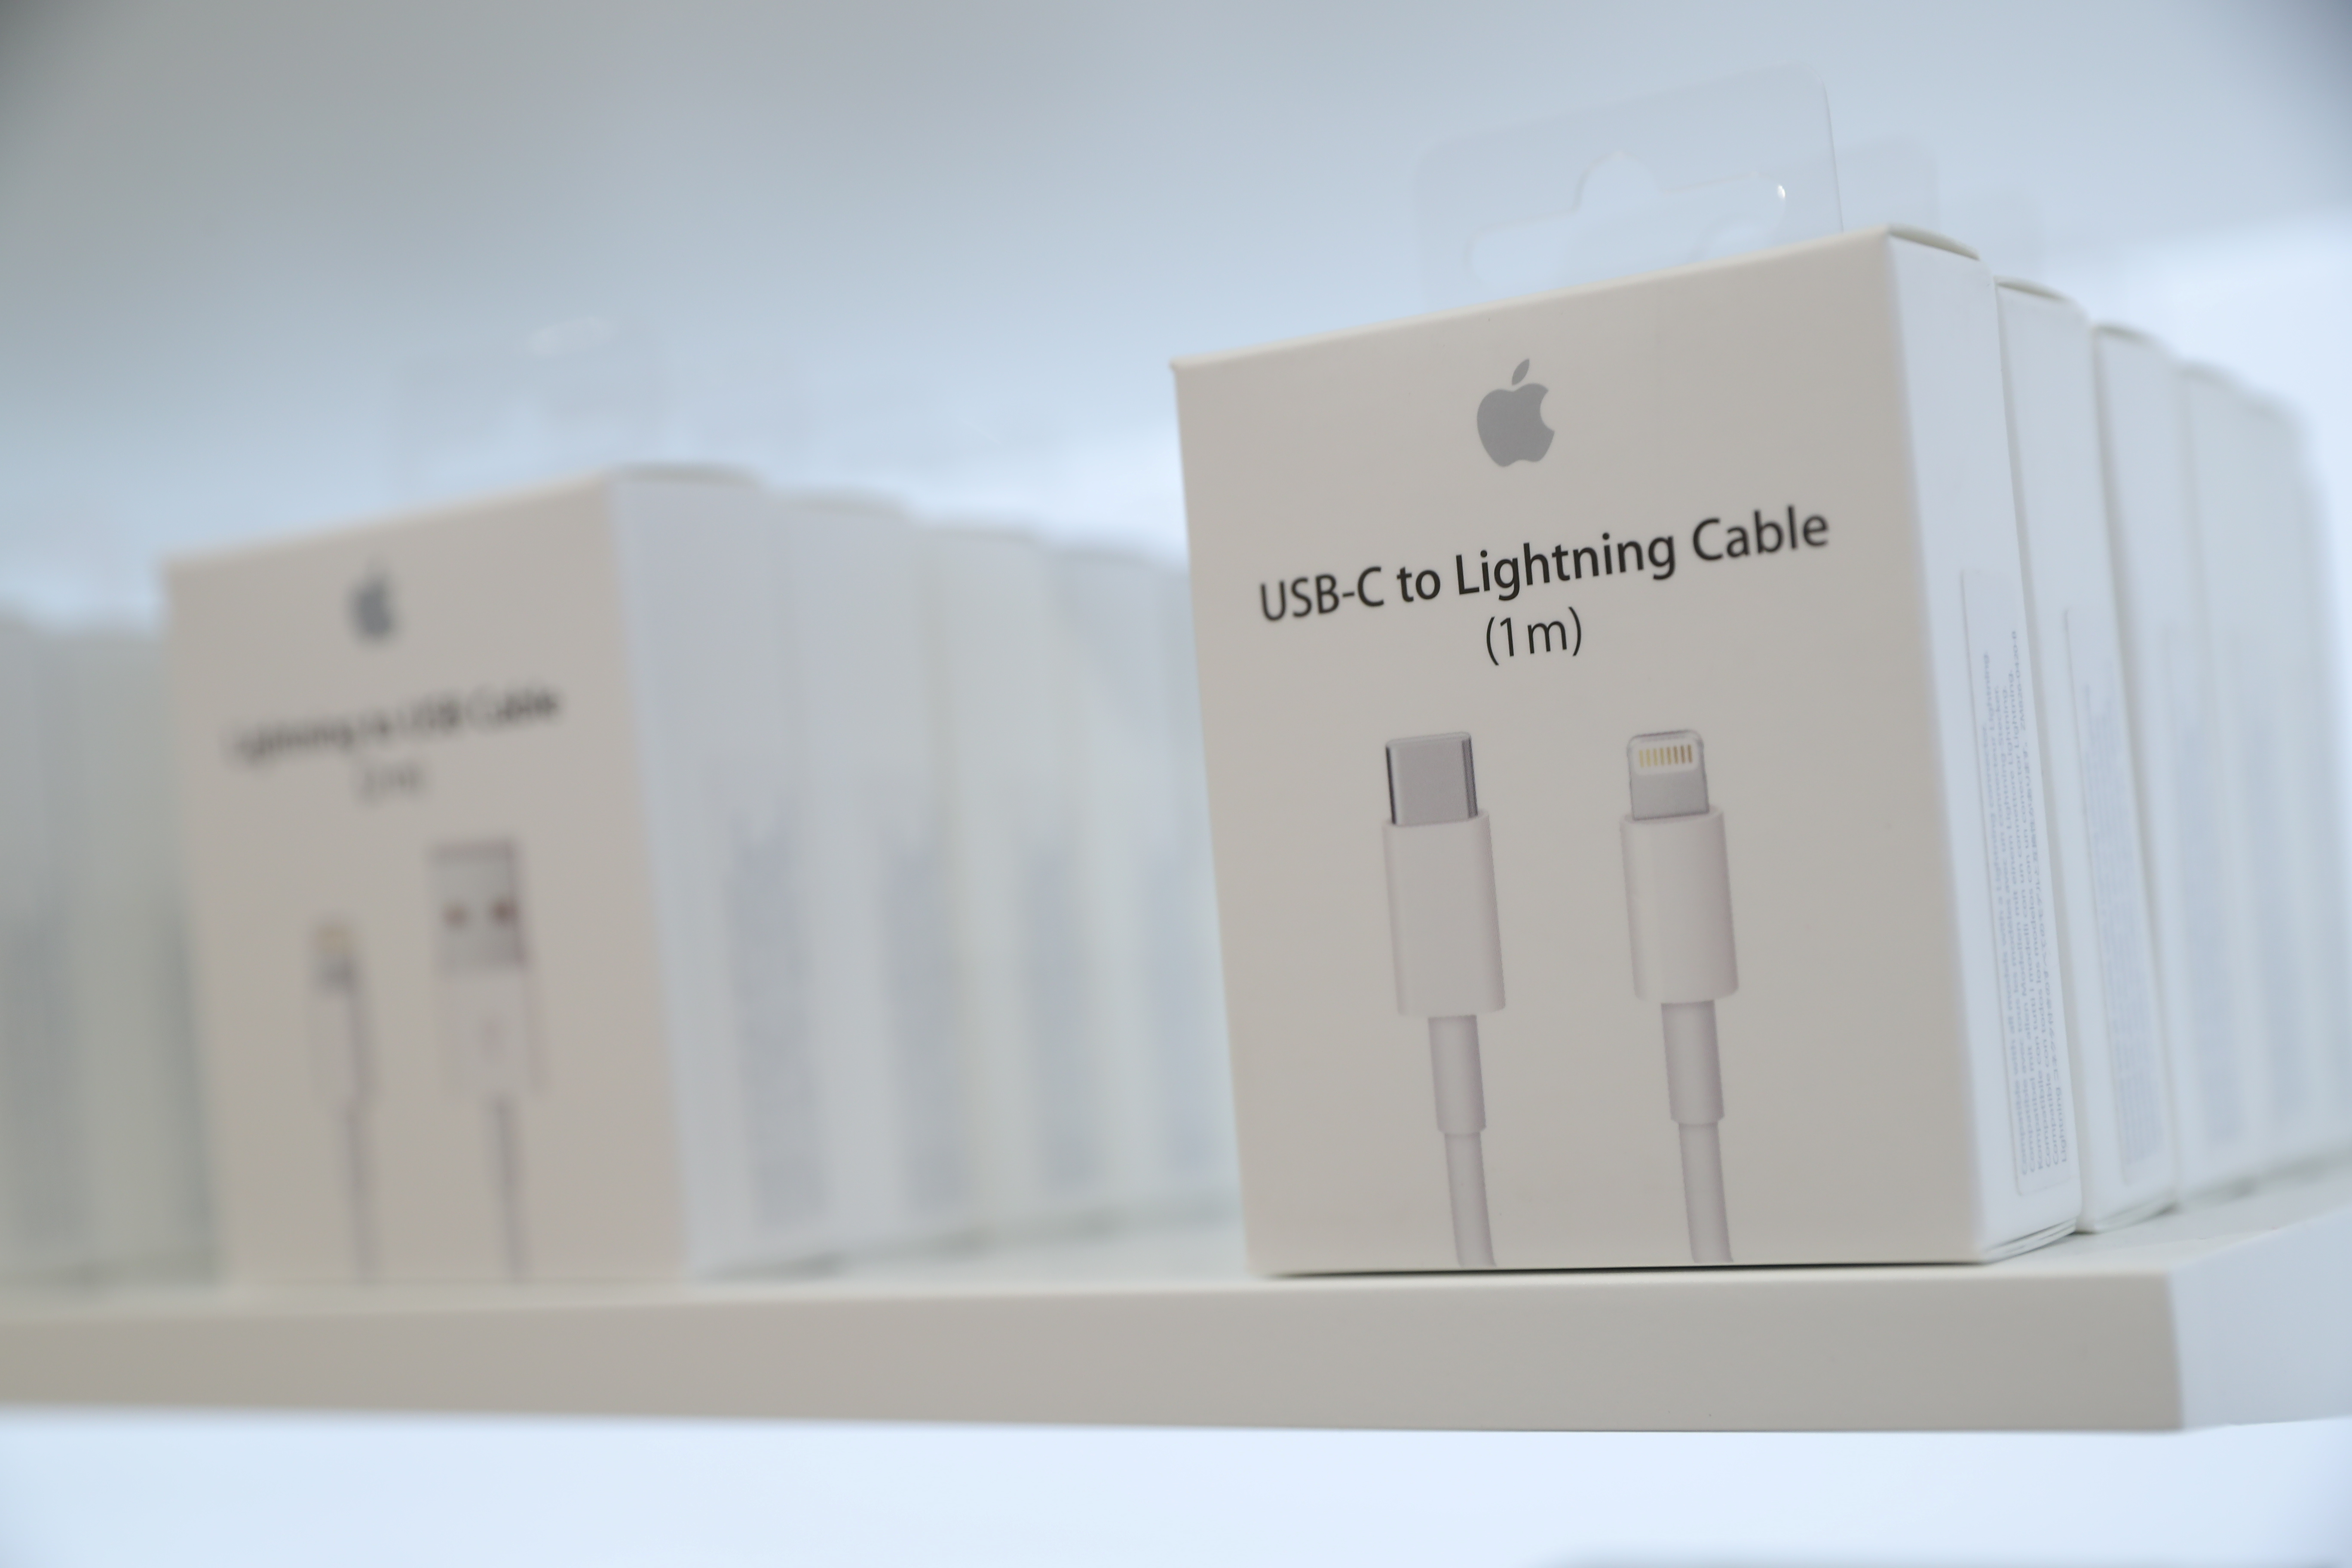 USB-C to Lightning Cable adapters are seen at a new Apple store in Chicago